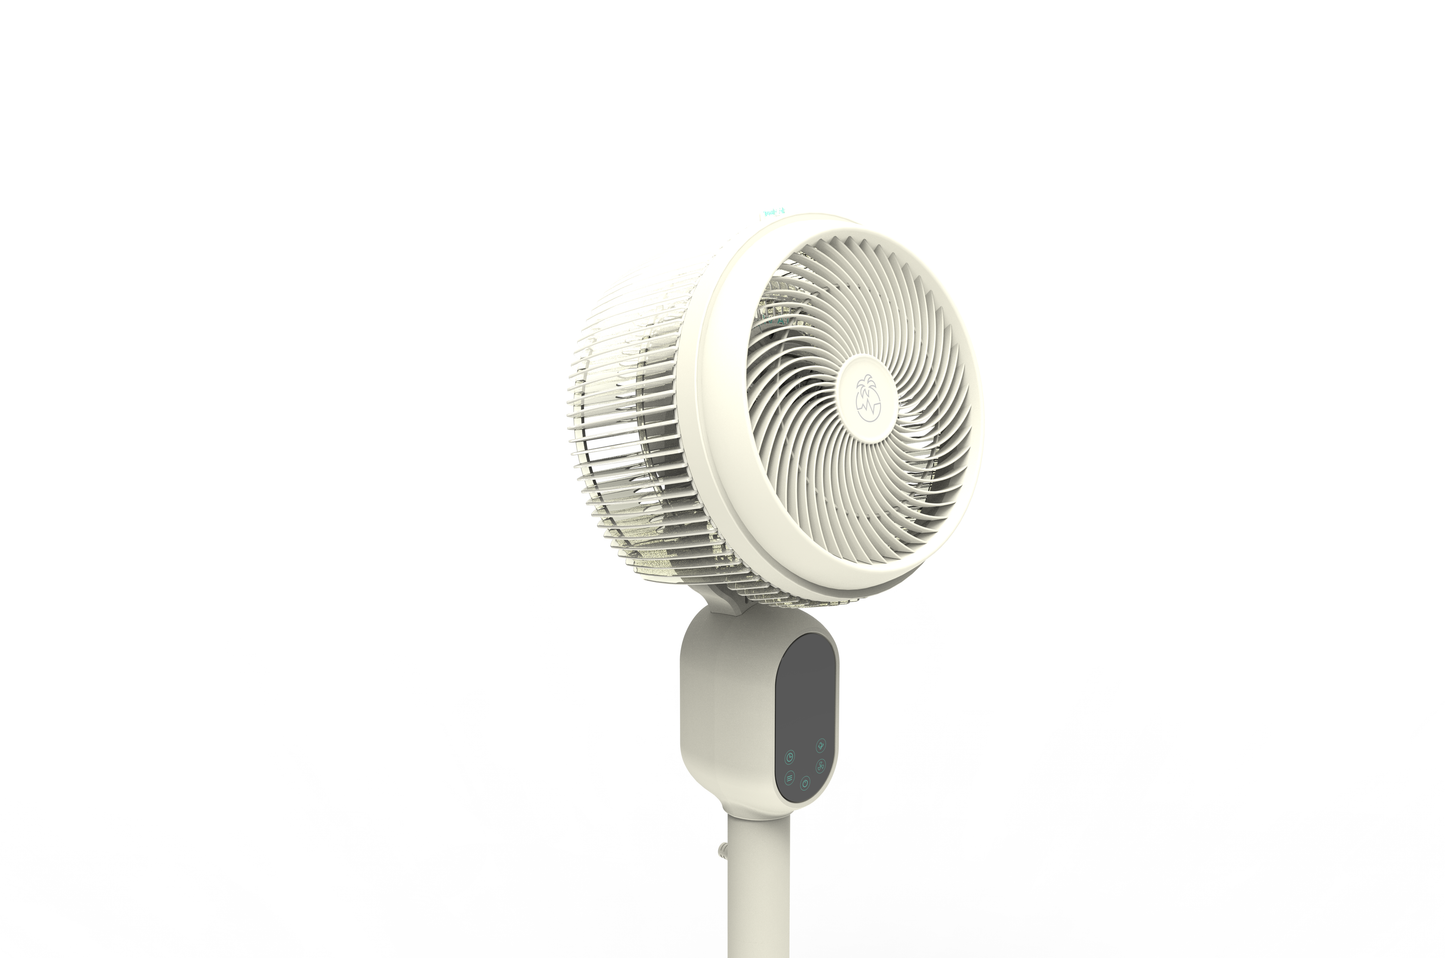 Treely Fan - The first air purifying circulation fan